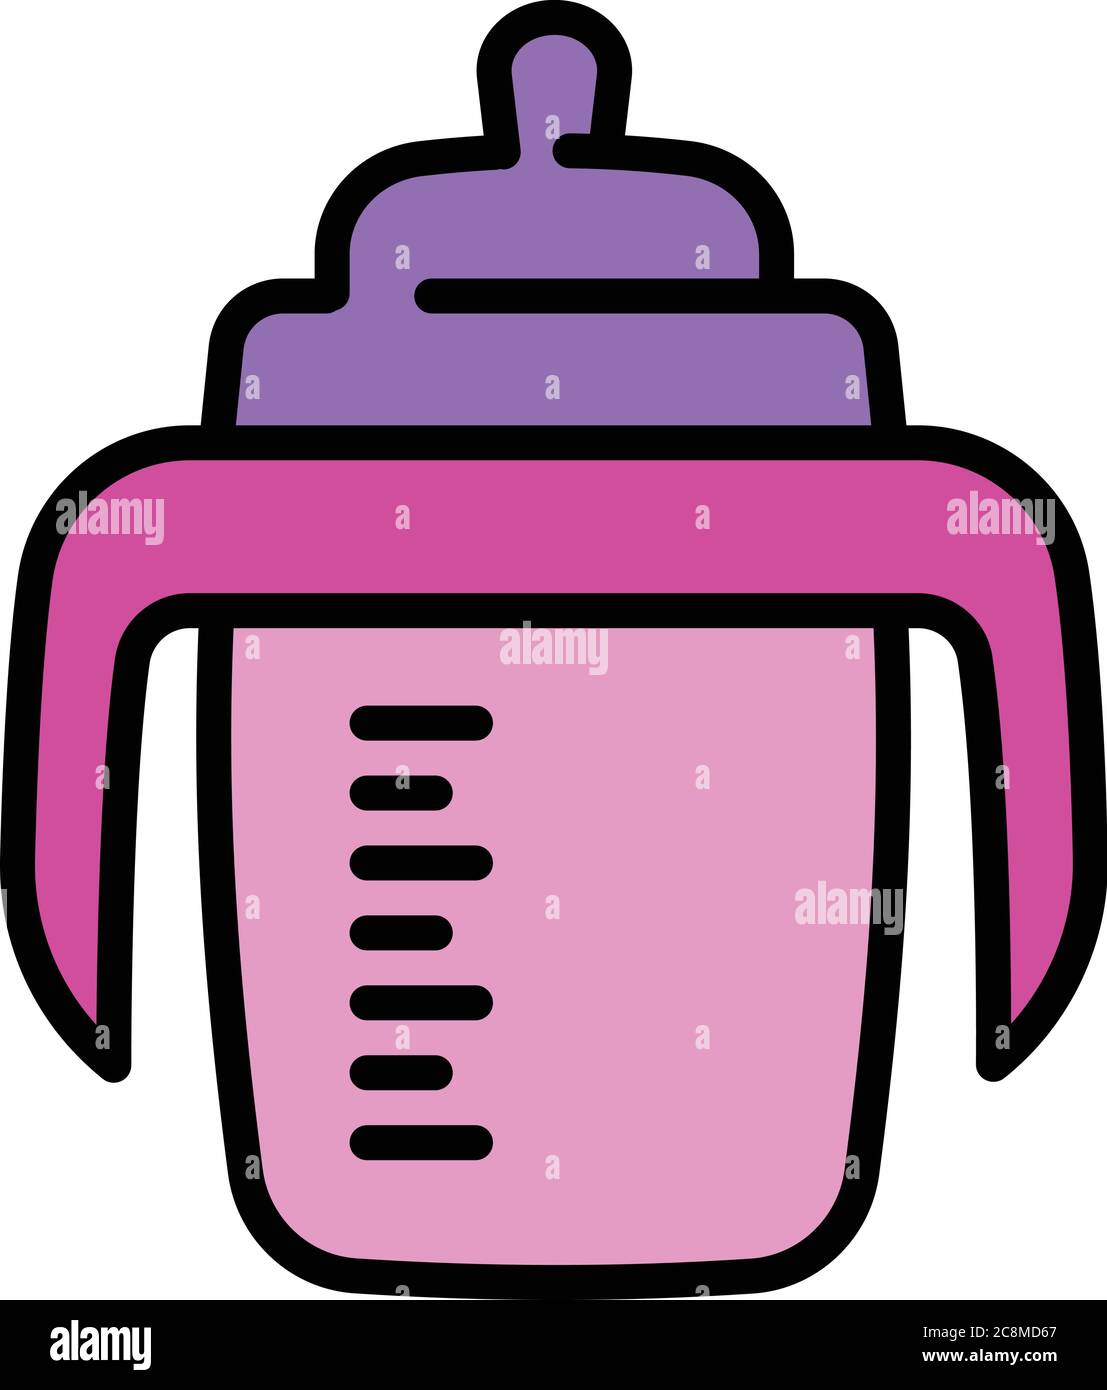 https://c8.alamy.com/comp/2C8MD67/sippy-cup-icon-outline-sippy-cup-vector-icon-for-web-design-isolated-on-white-background-2C8MD67.jpg